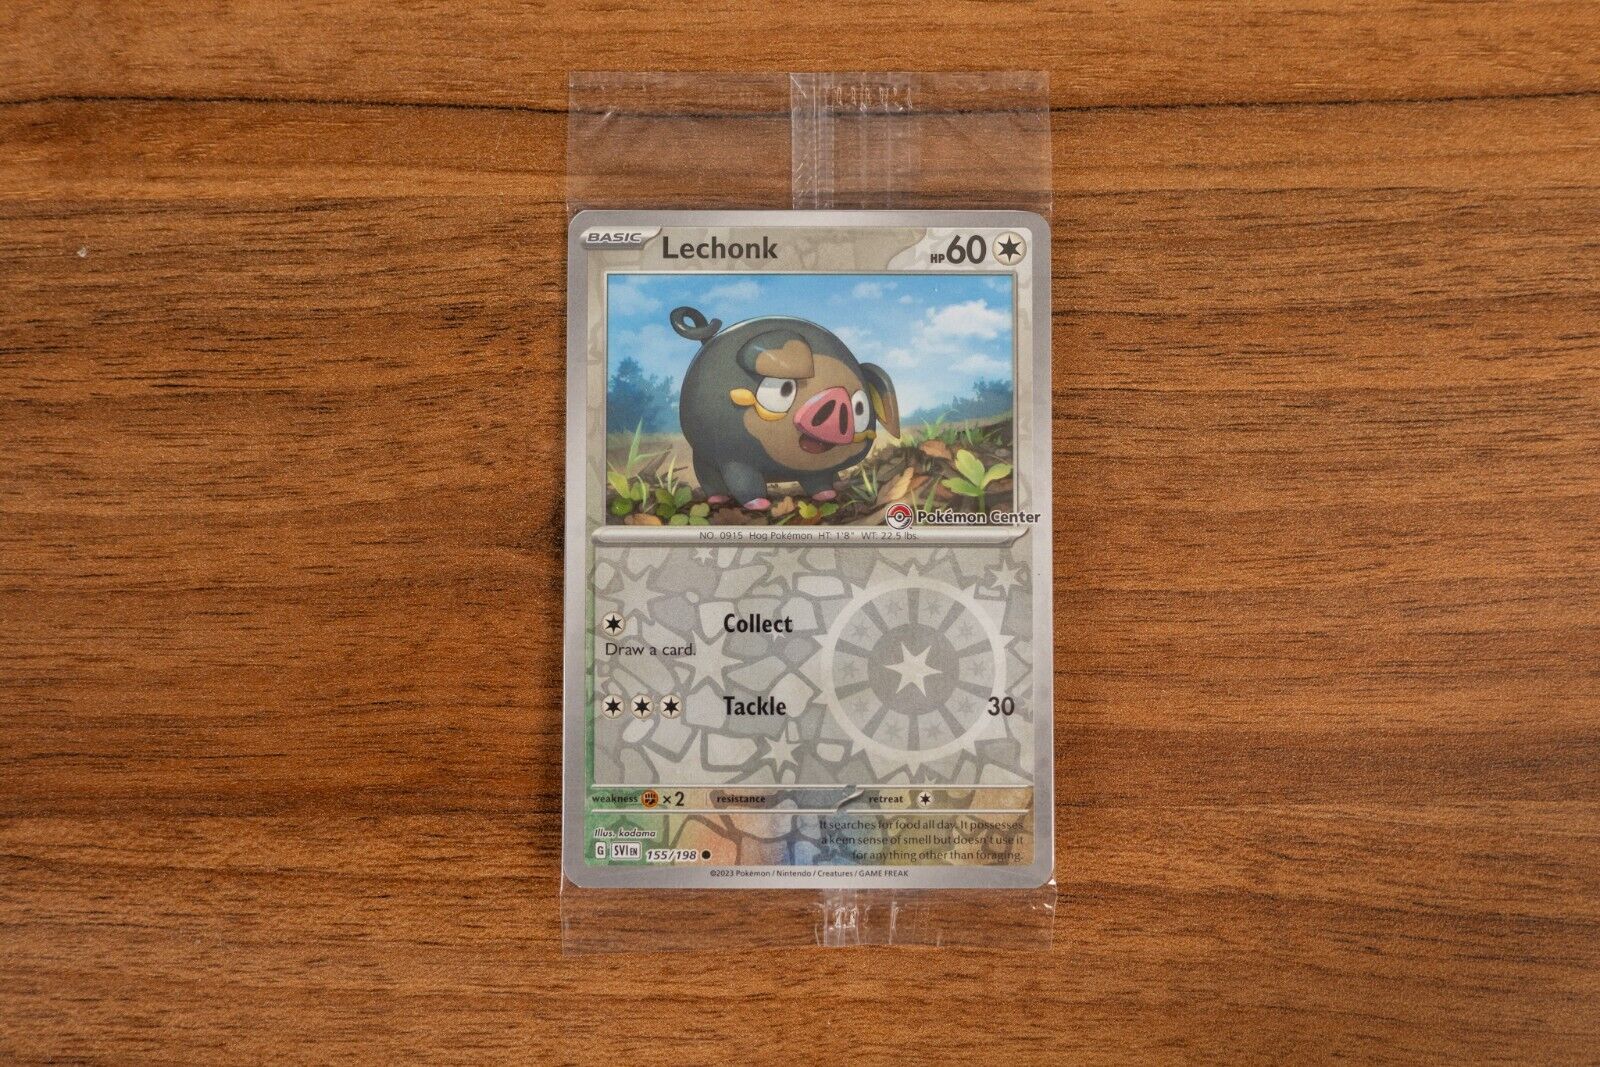 Lechonk Pokemon Center Stamped Exclusive Reverse Promo Card Brand New and Sealed